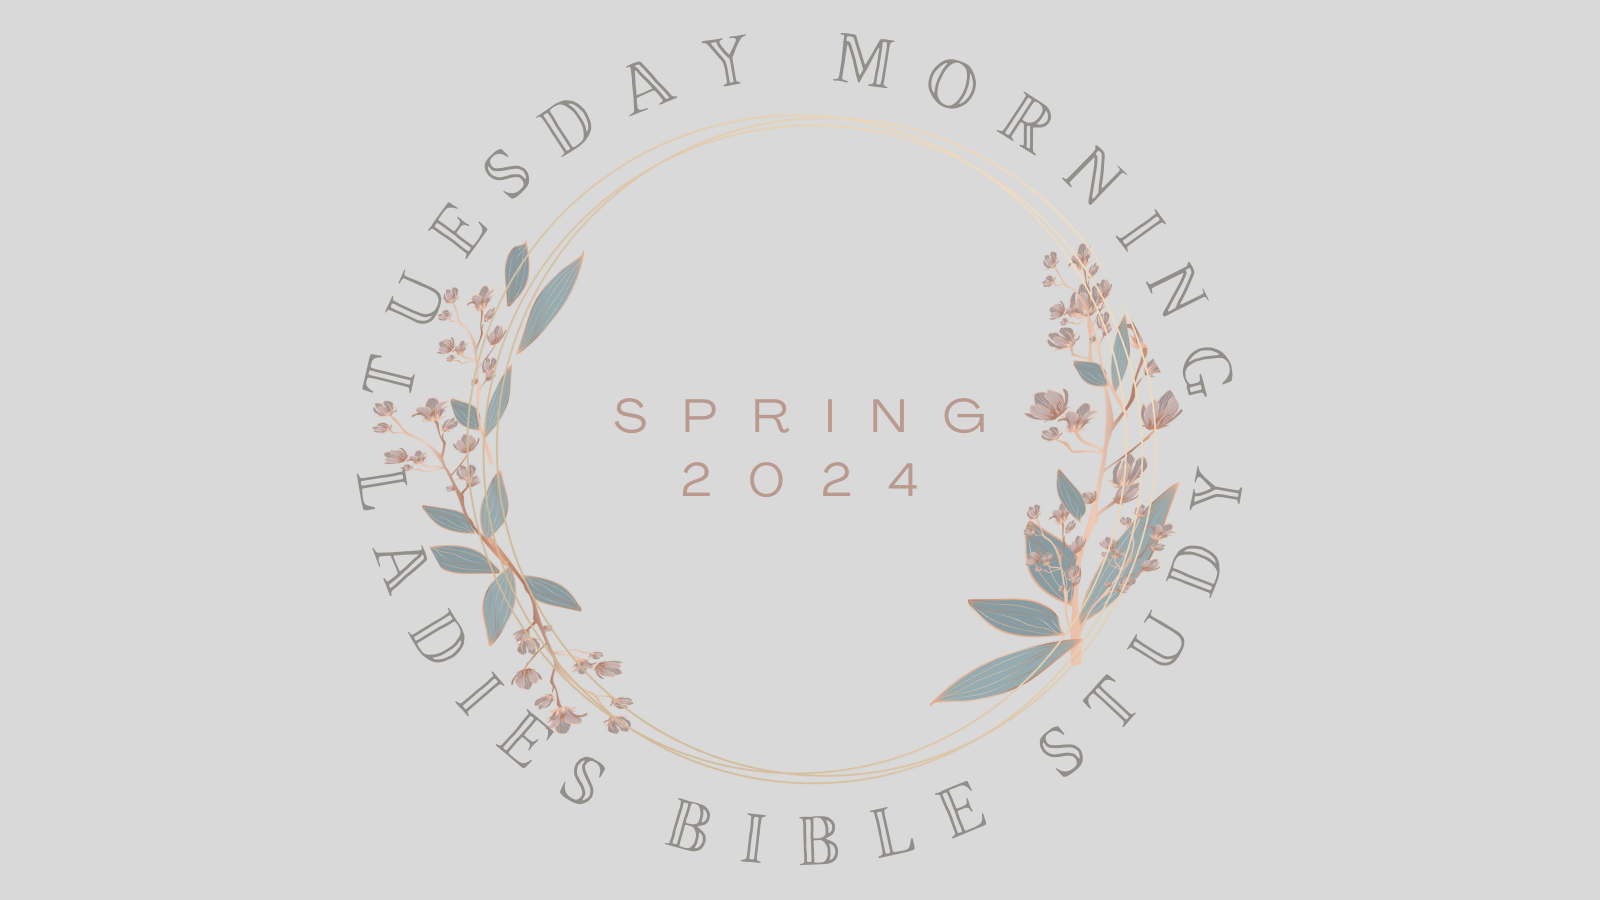 Tuesday Morning Ladies Bible Study spring 24 (1600 × 900 px)